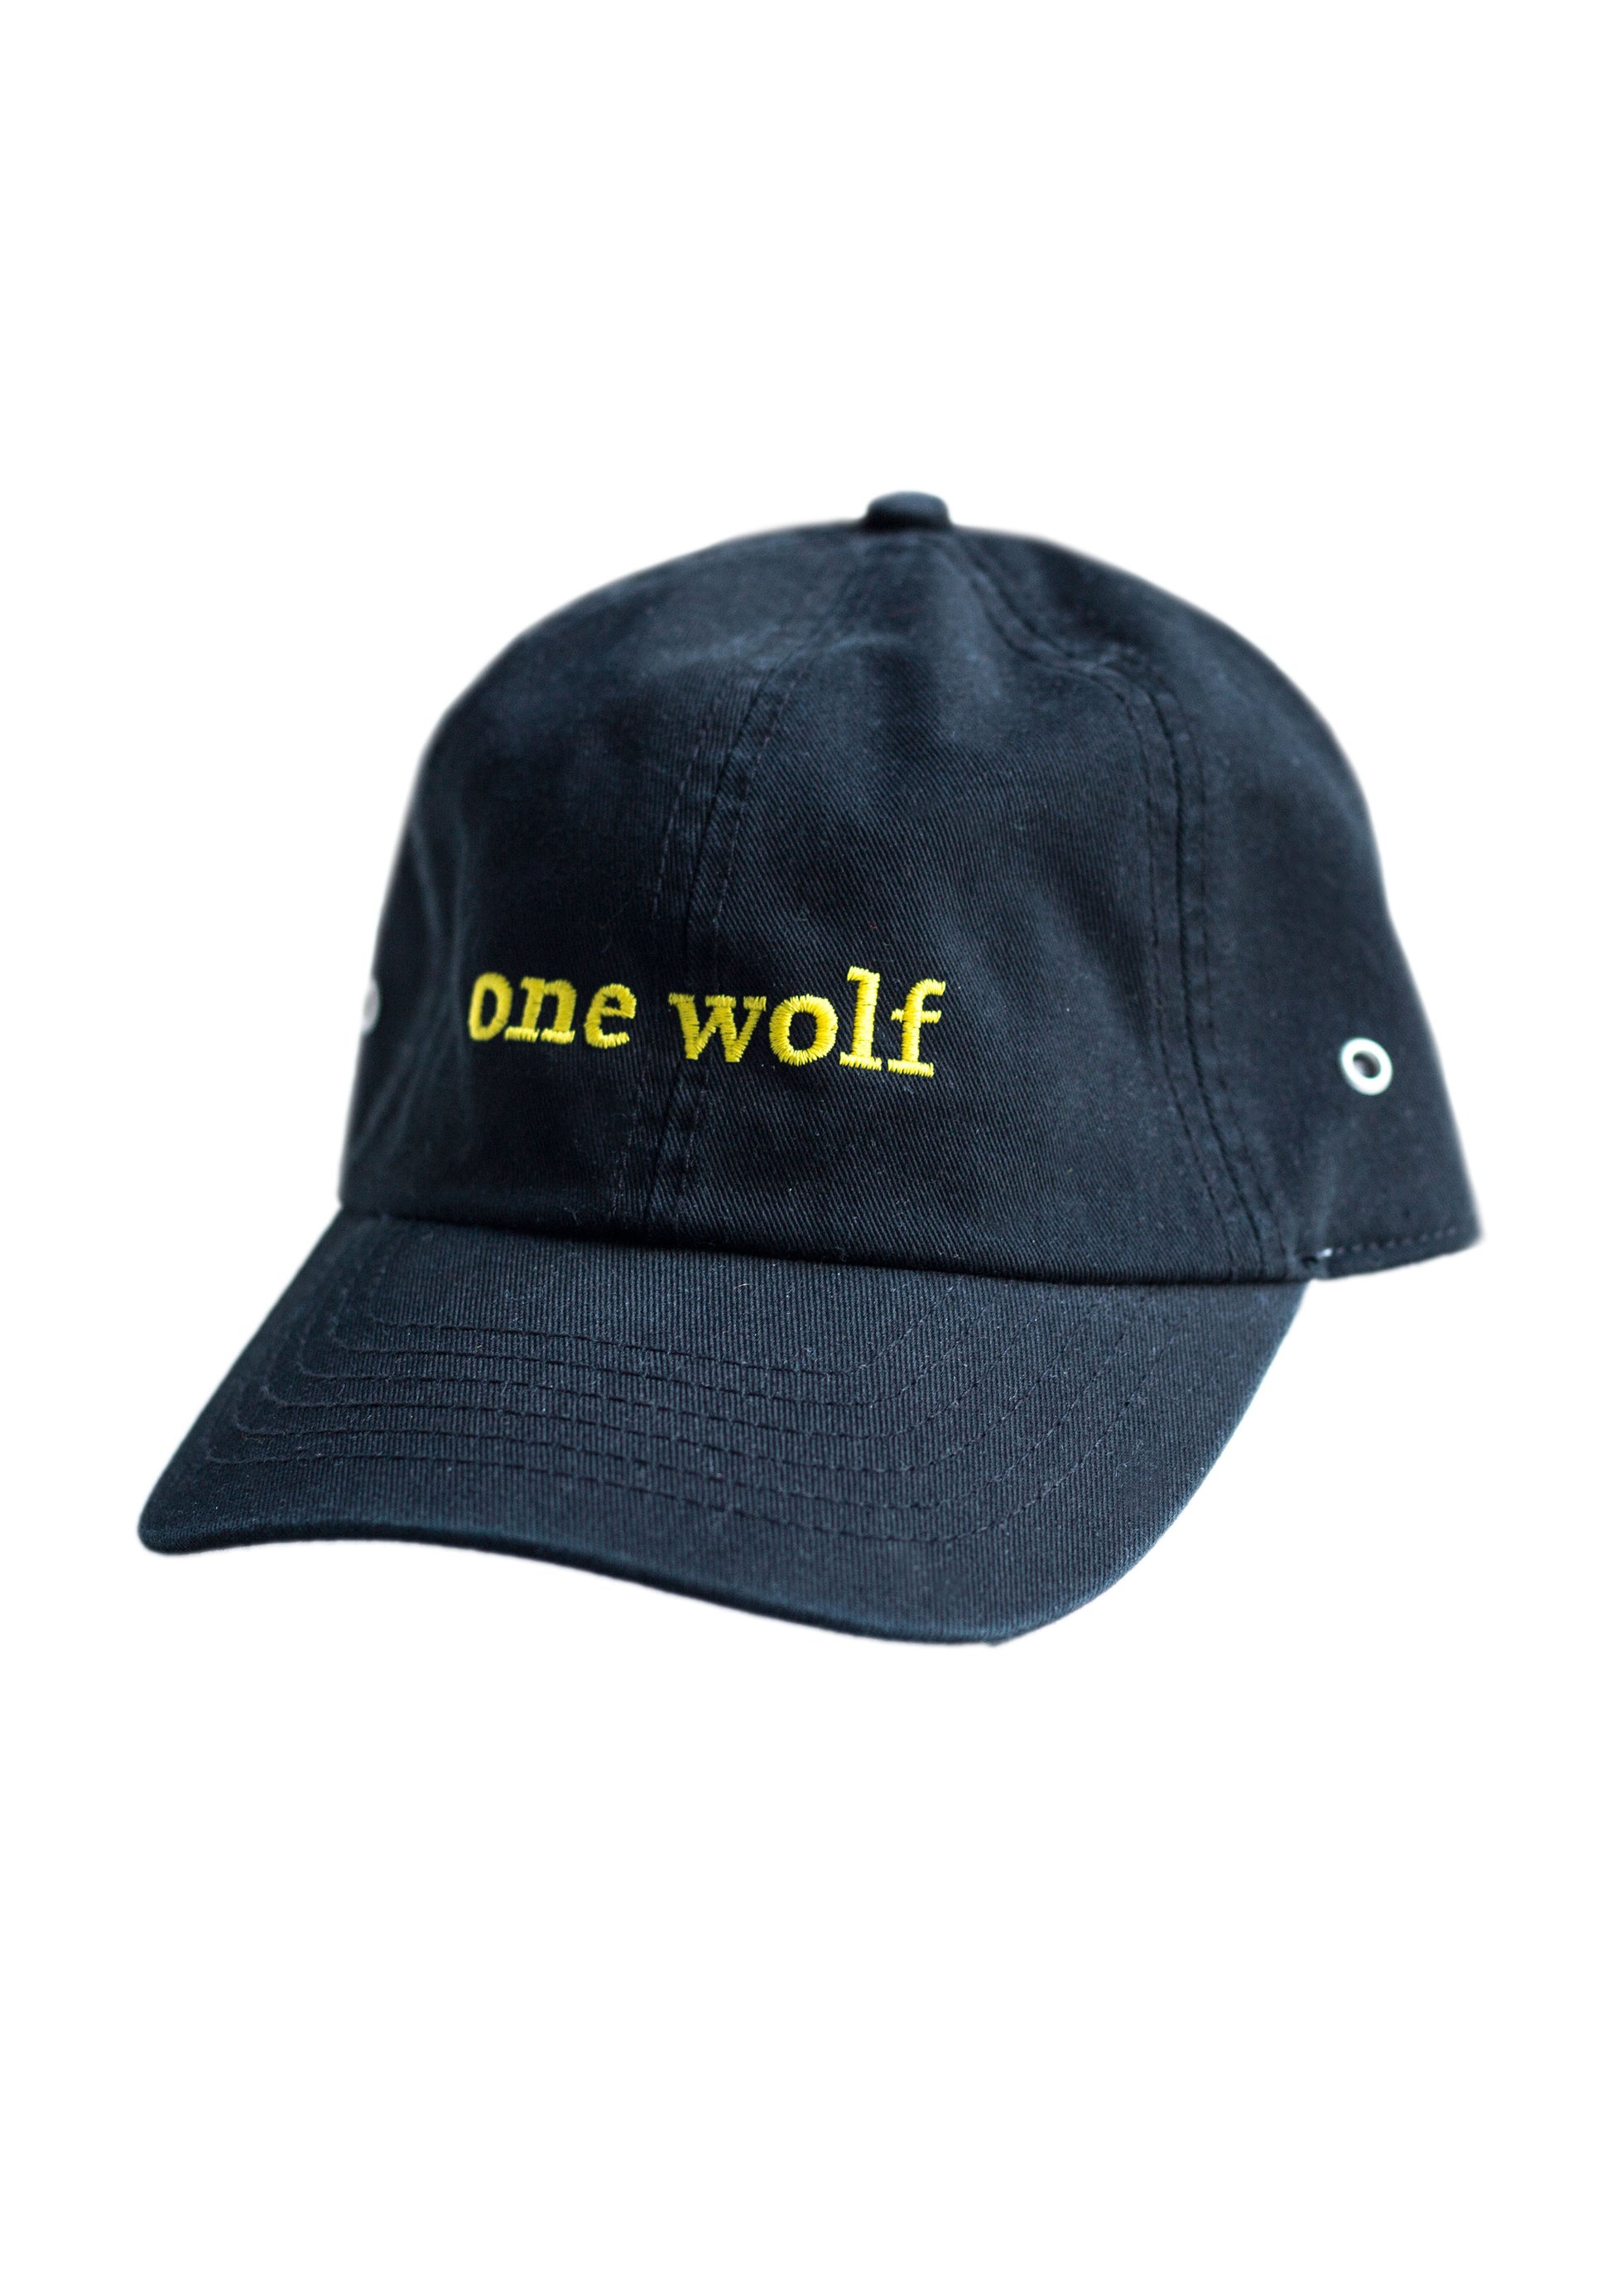 OUTSIDER Cap black - One Wolf